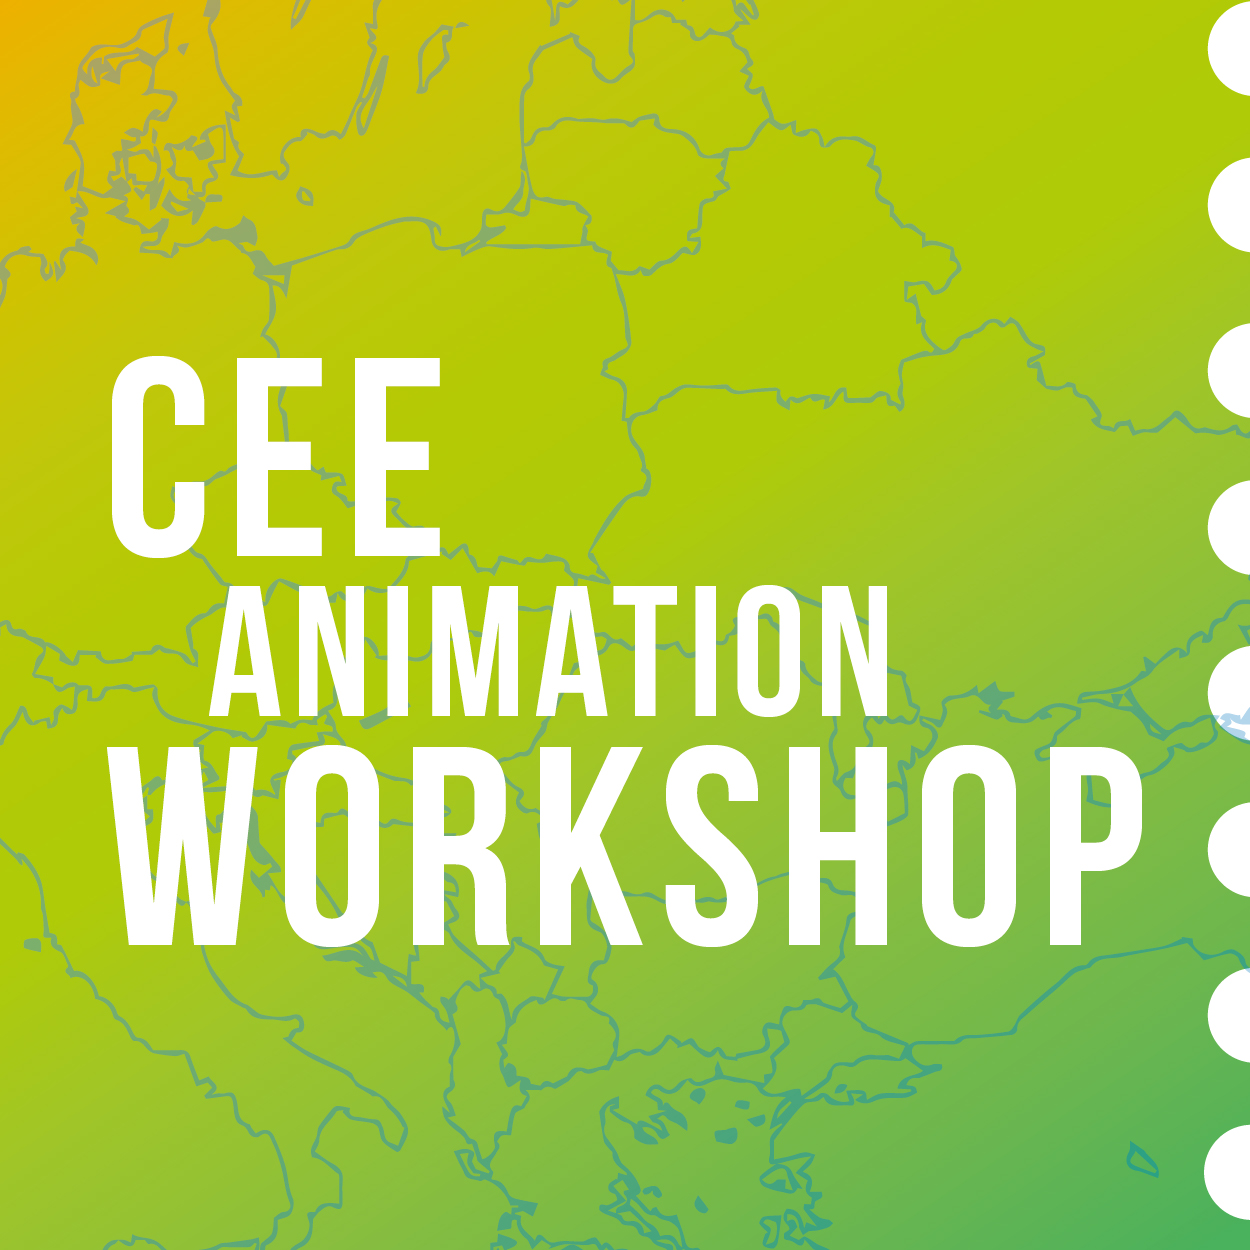 CEE Animation Workshop, 2-6/12/17: Call for participants